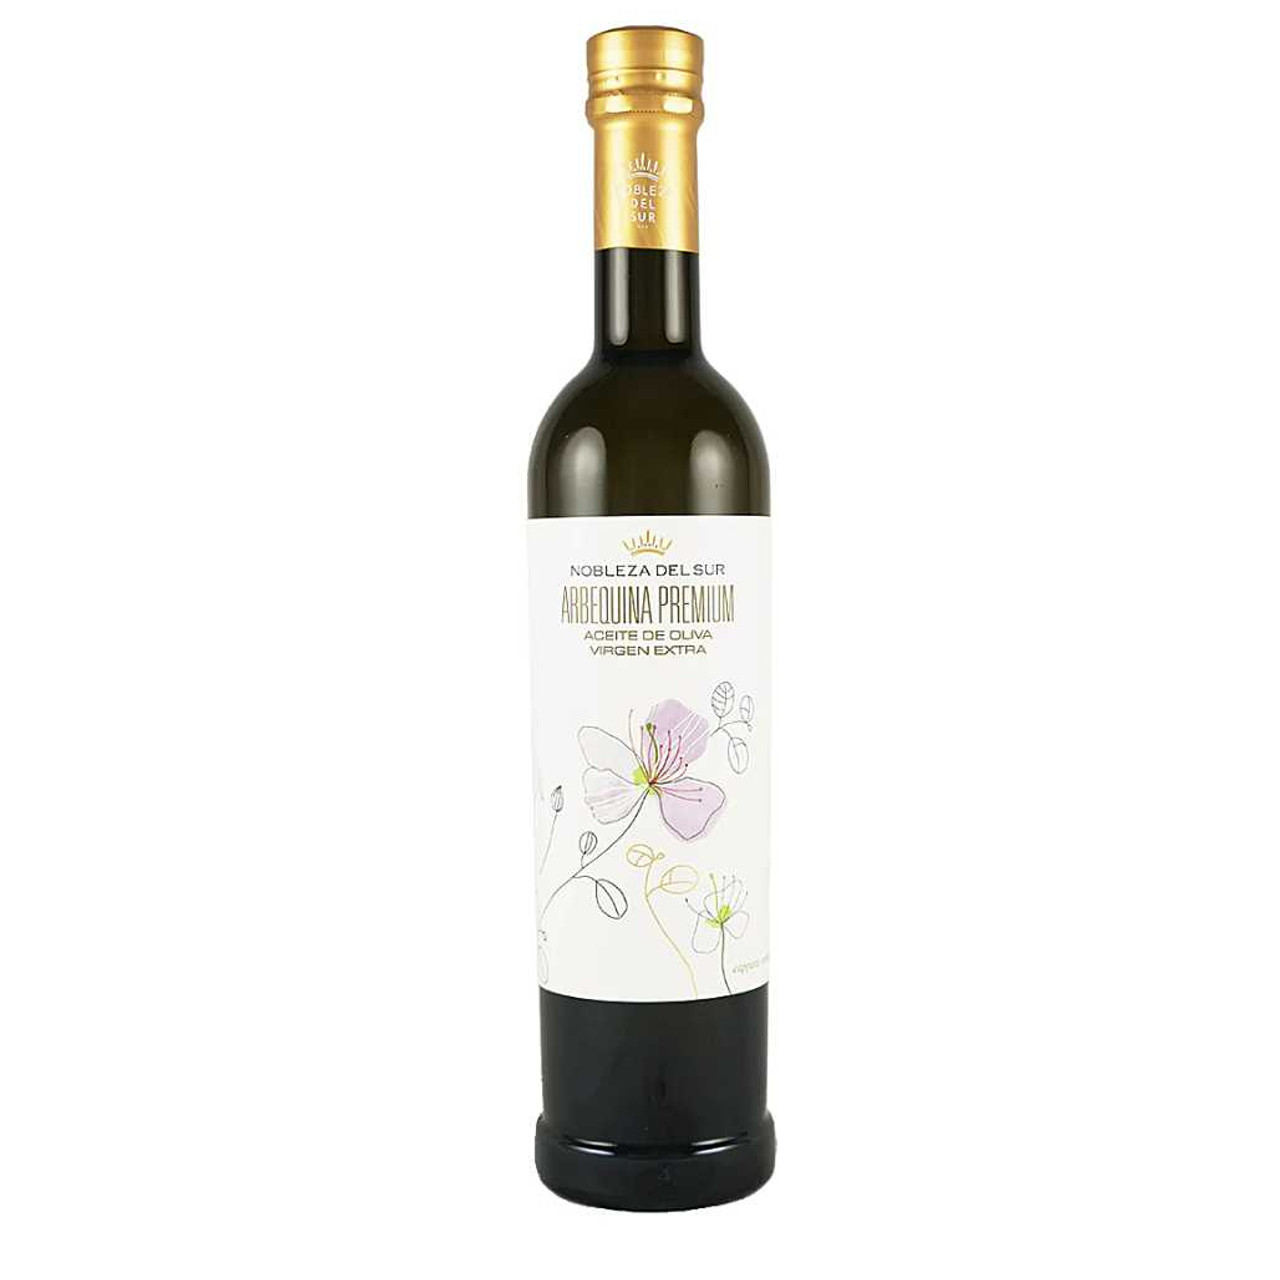 Huile d'Olive Extra Vierge Arbequina 5 Litres Gold Collection